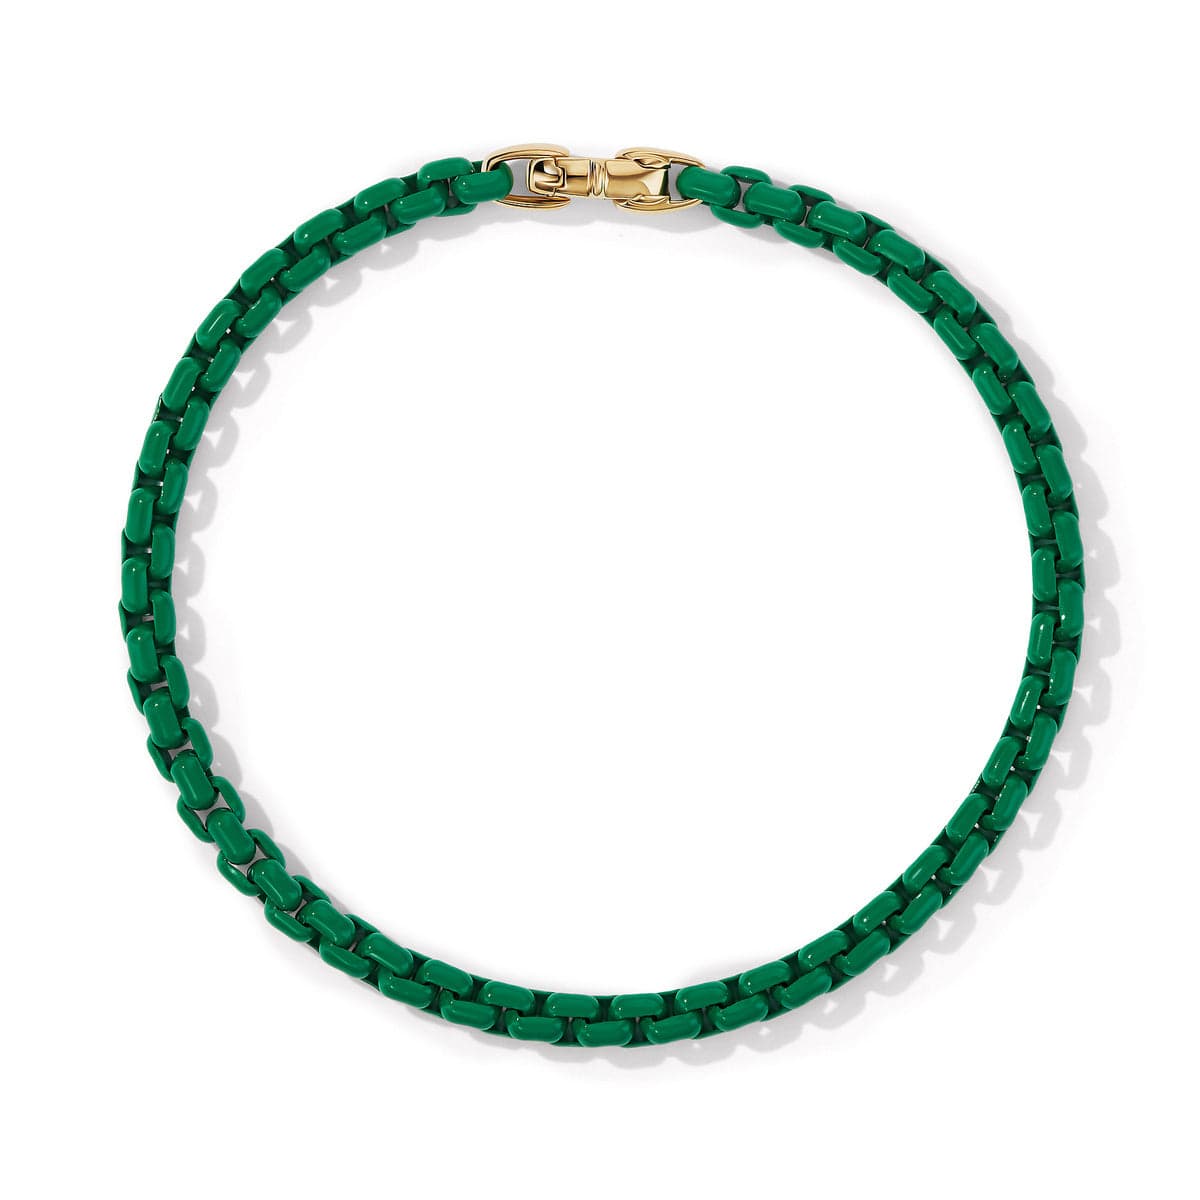 DY Bel Aire Chain Bracelet in Emerald Green with 14K Yellow Gold Accent